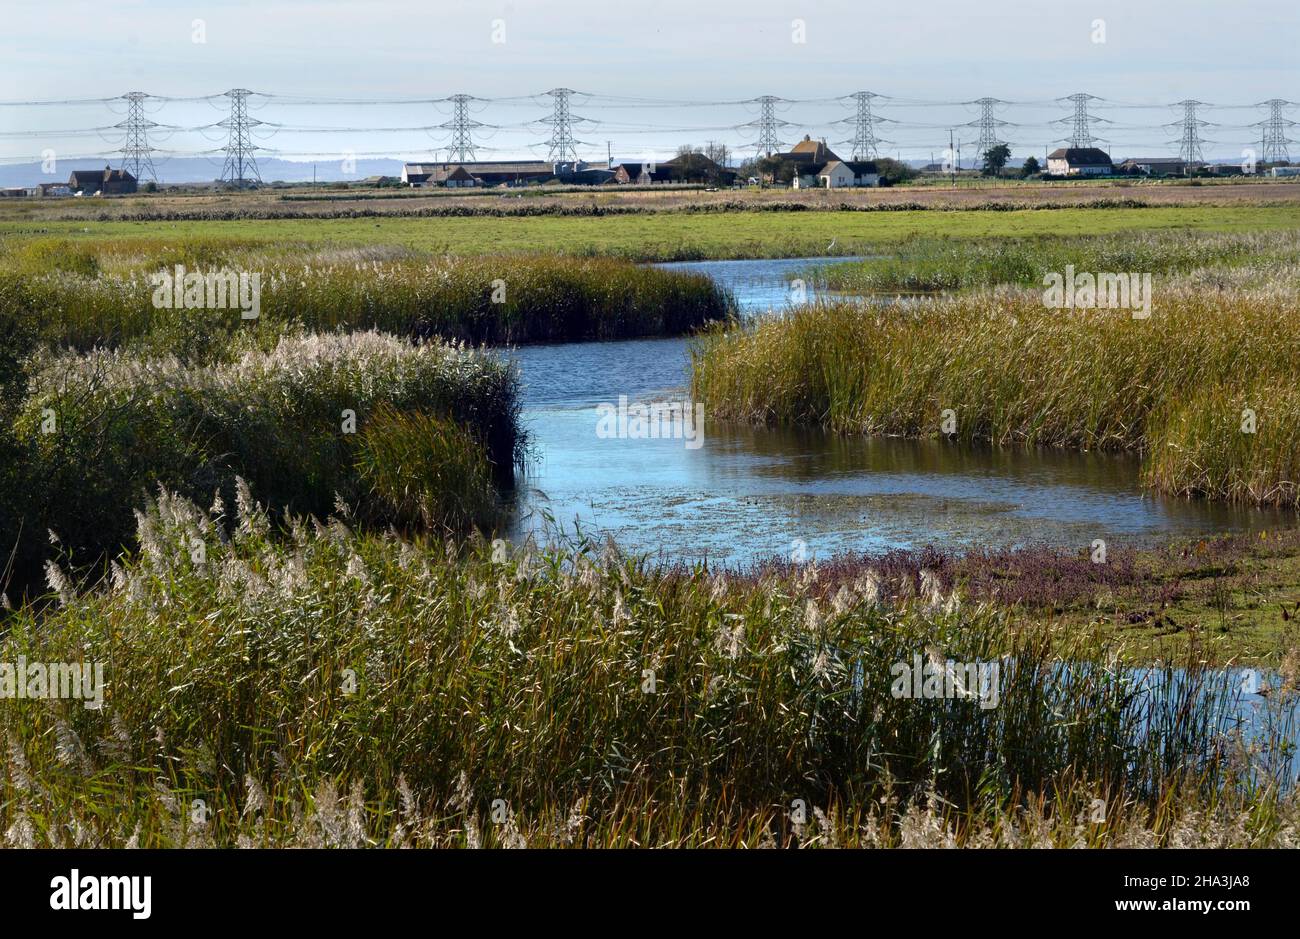 electricity pylons and powerlines running through romney marshes dungeness kent Stock Photo